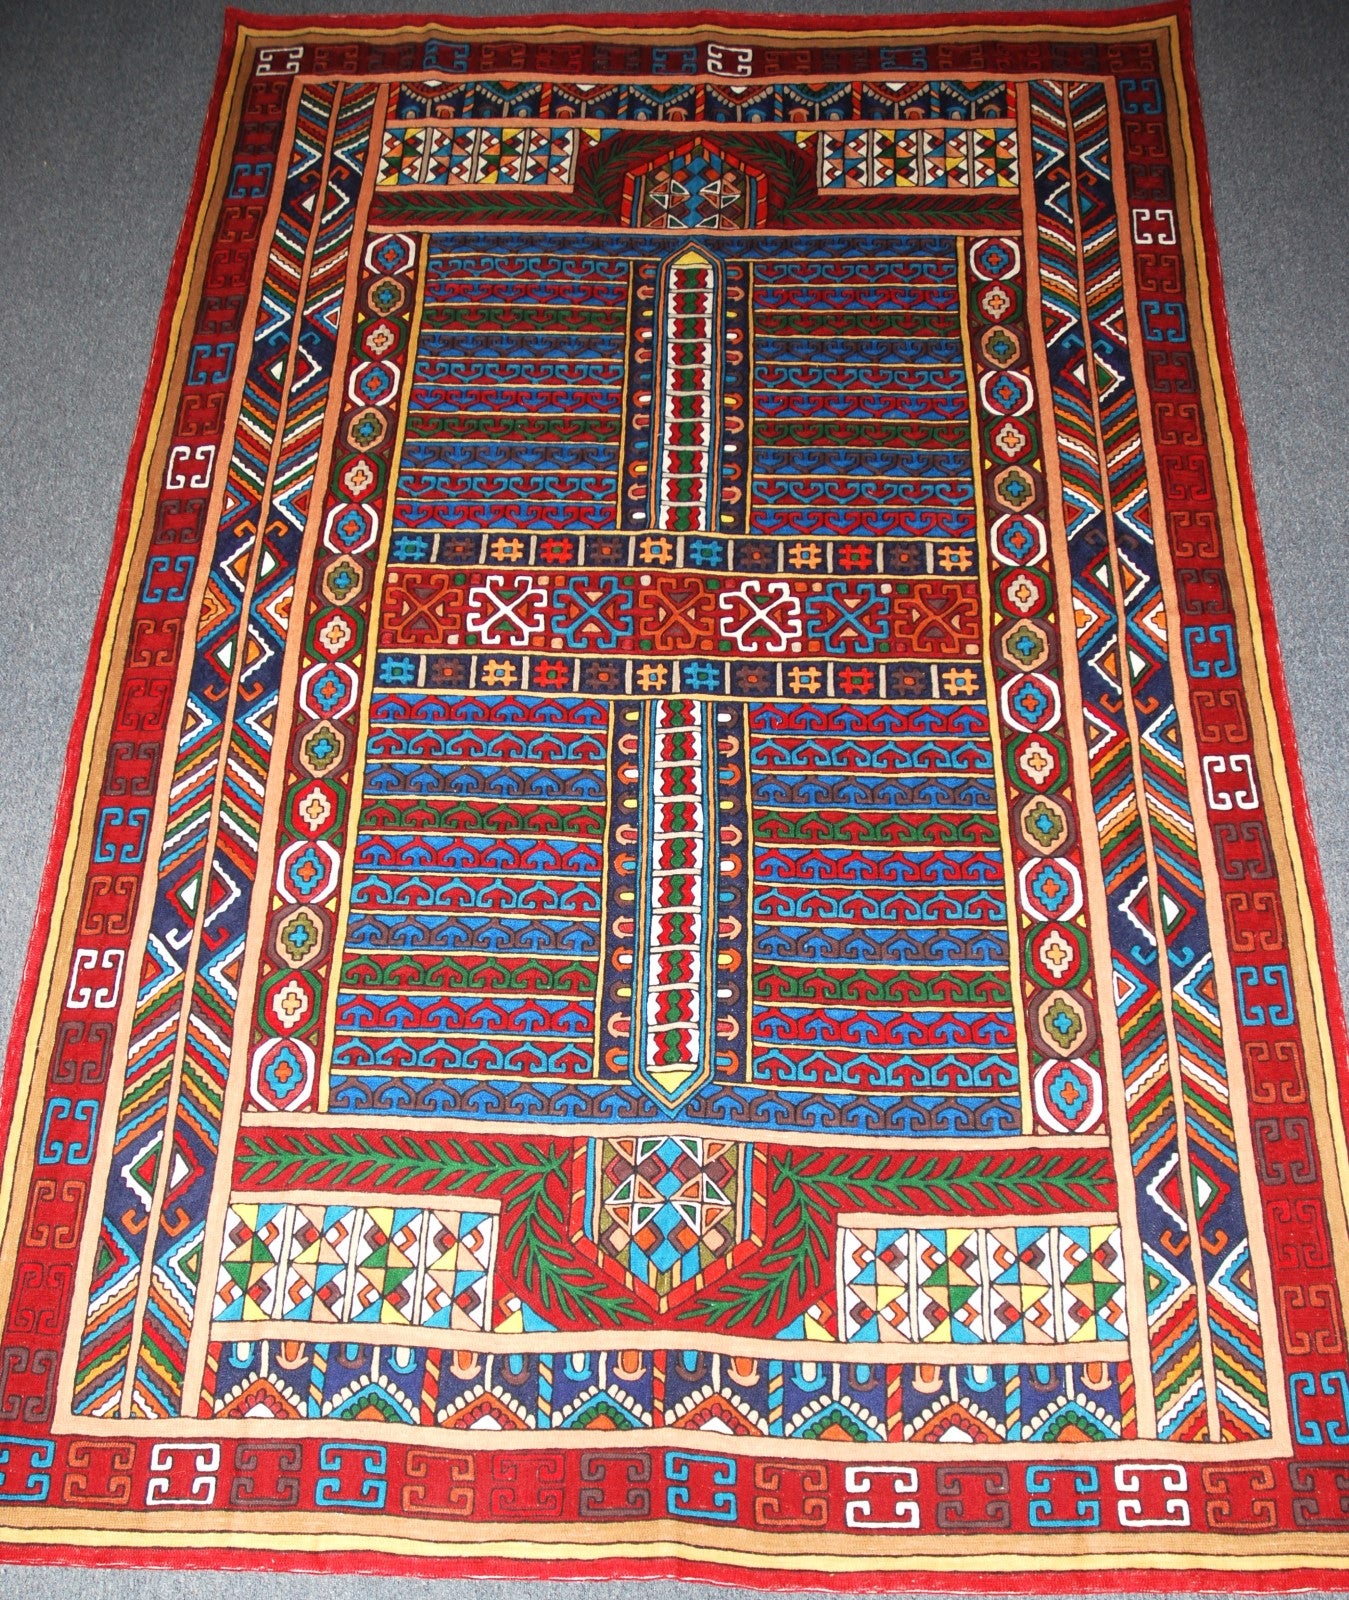 Kashmir Wool Rug "Kelim" ChainStitch Tapestry Area Rug, Multicolor Embroidery 6x9 feet #CWR54109